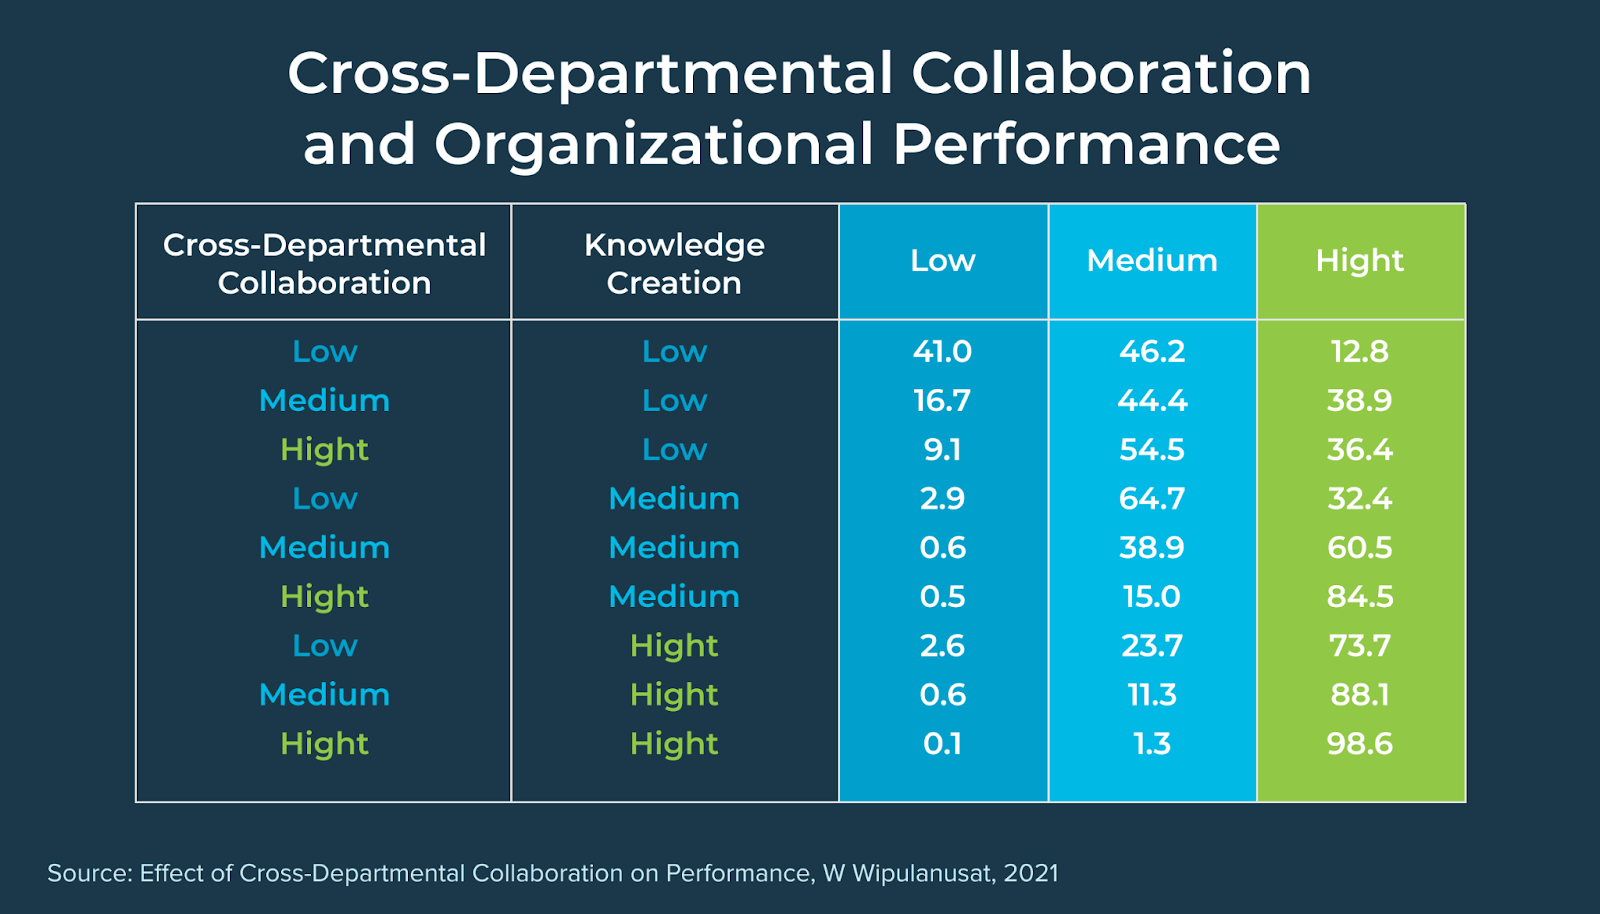 Organizational performance and cross-departmental collaboration